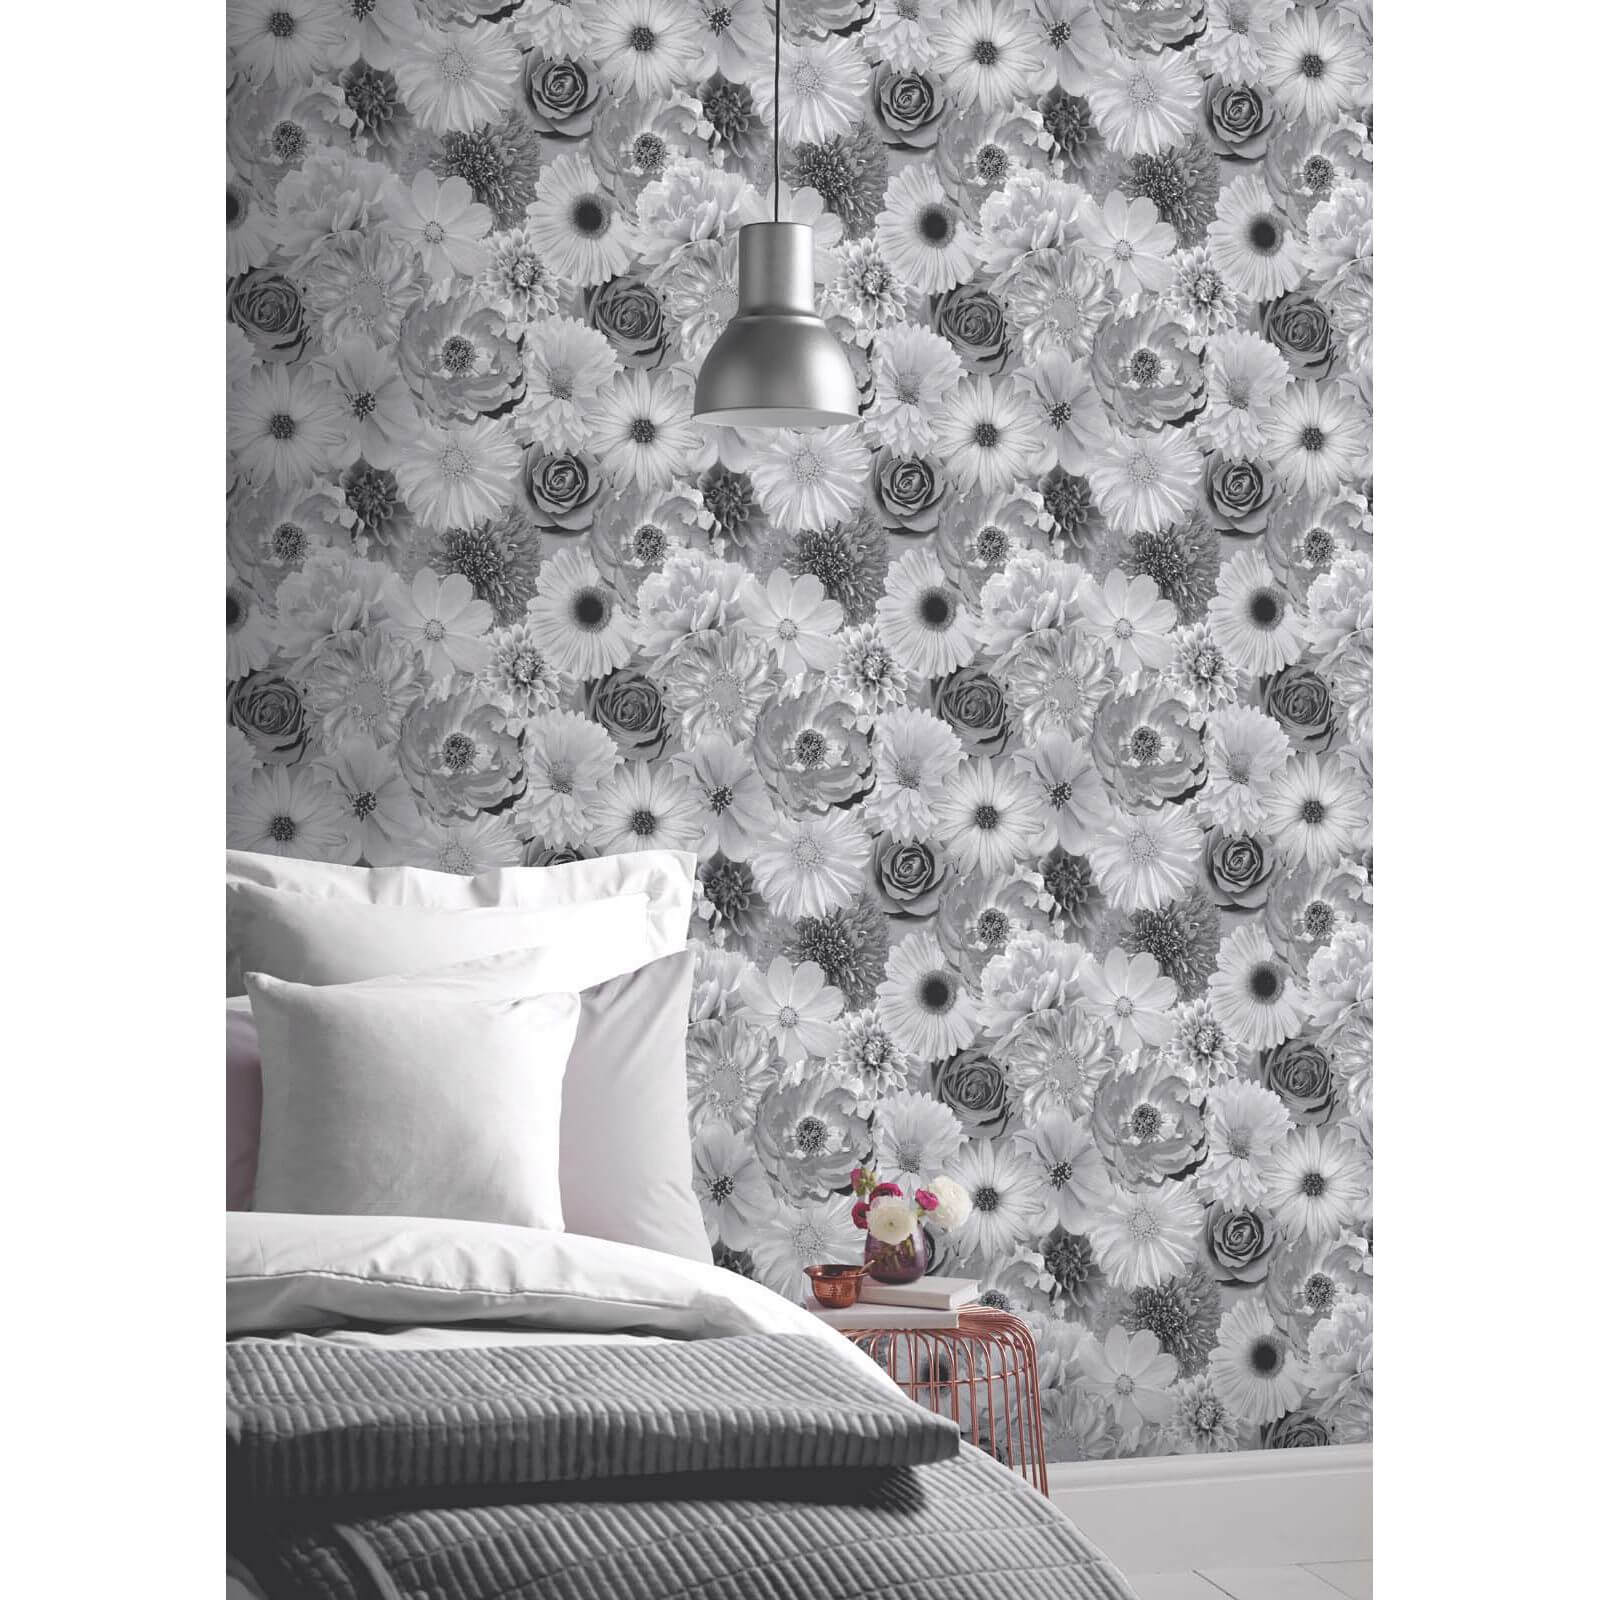 Arthouse Foil in Bloom Floral Textured Metallic Black and Silver Wallpaper